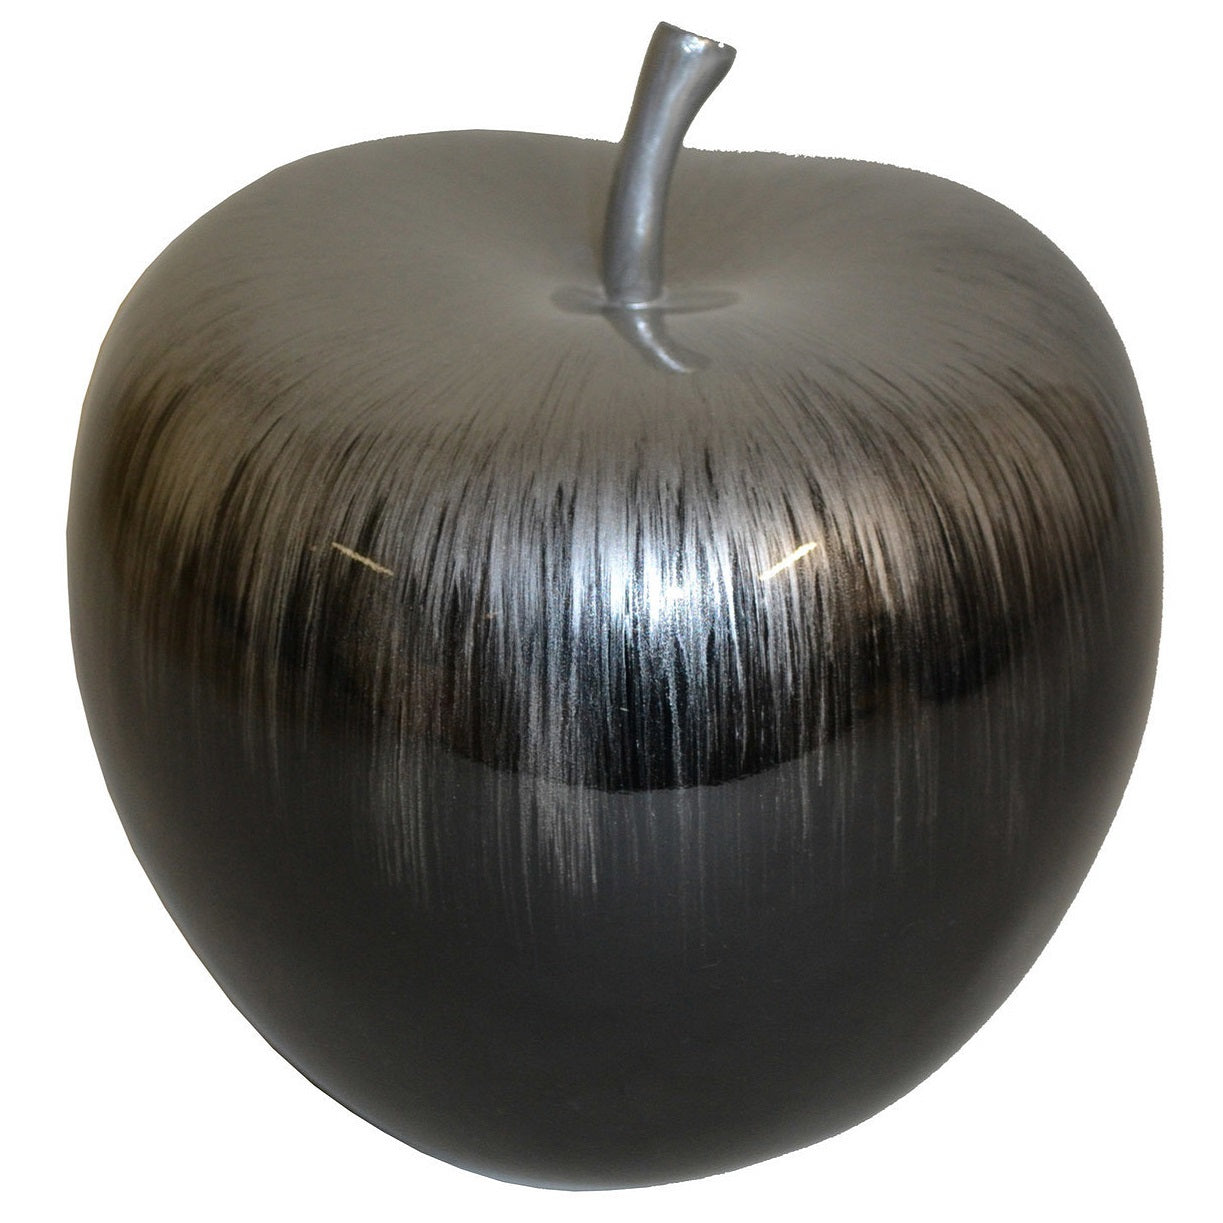 Hand Painted Lacquer Apple Sculpture - Notbrand